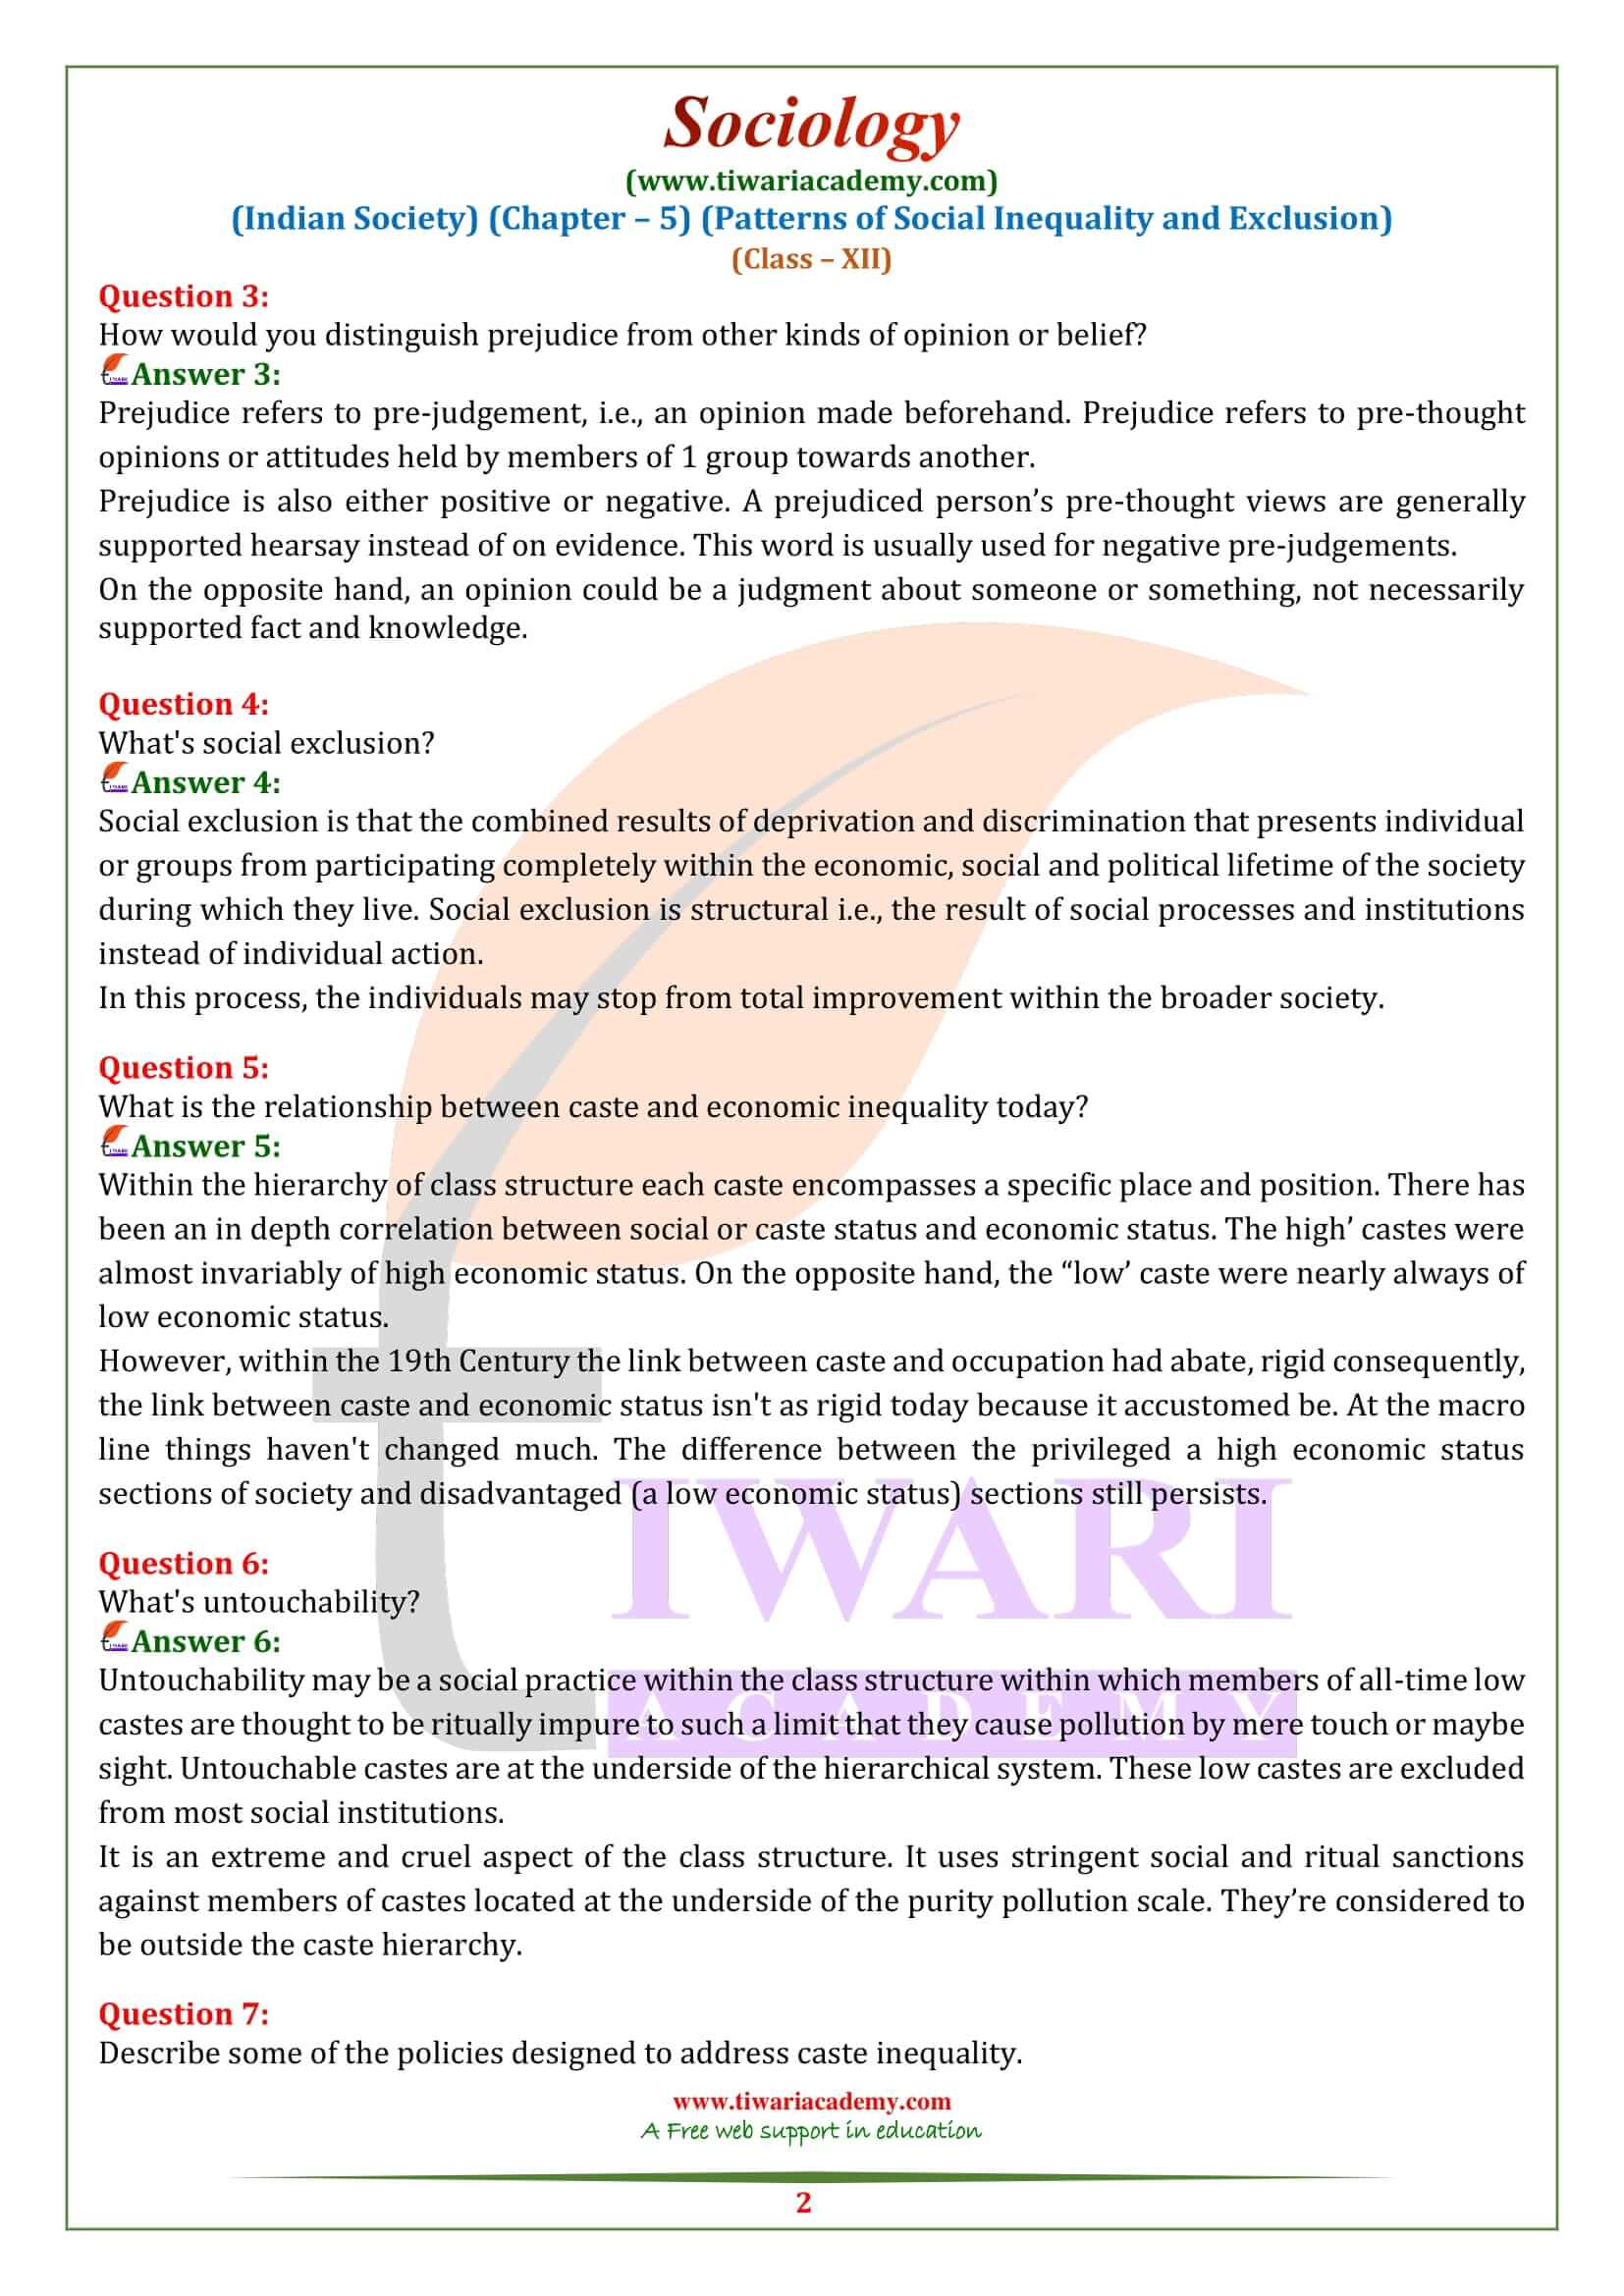 NCERT Solutions for Class 12 Sociology Chapter 5 Question Answers